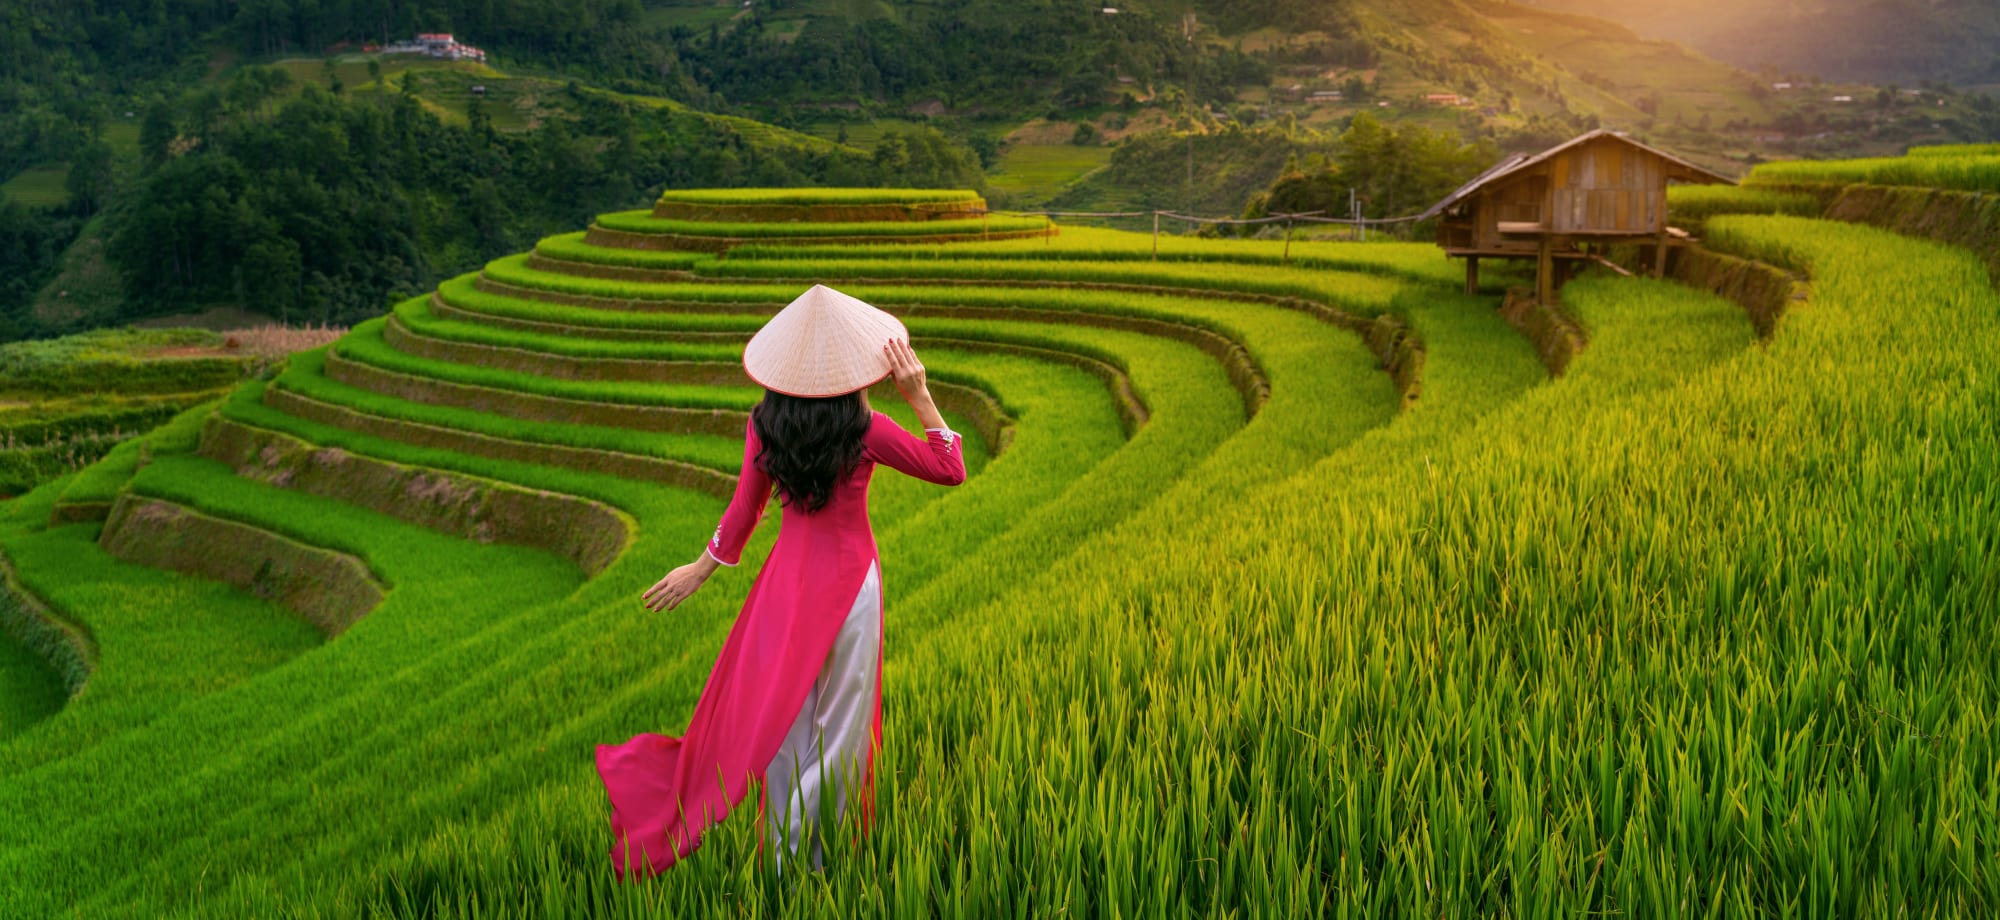 15 Most Beautiful Places To Visit in Vietnam